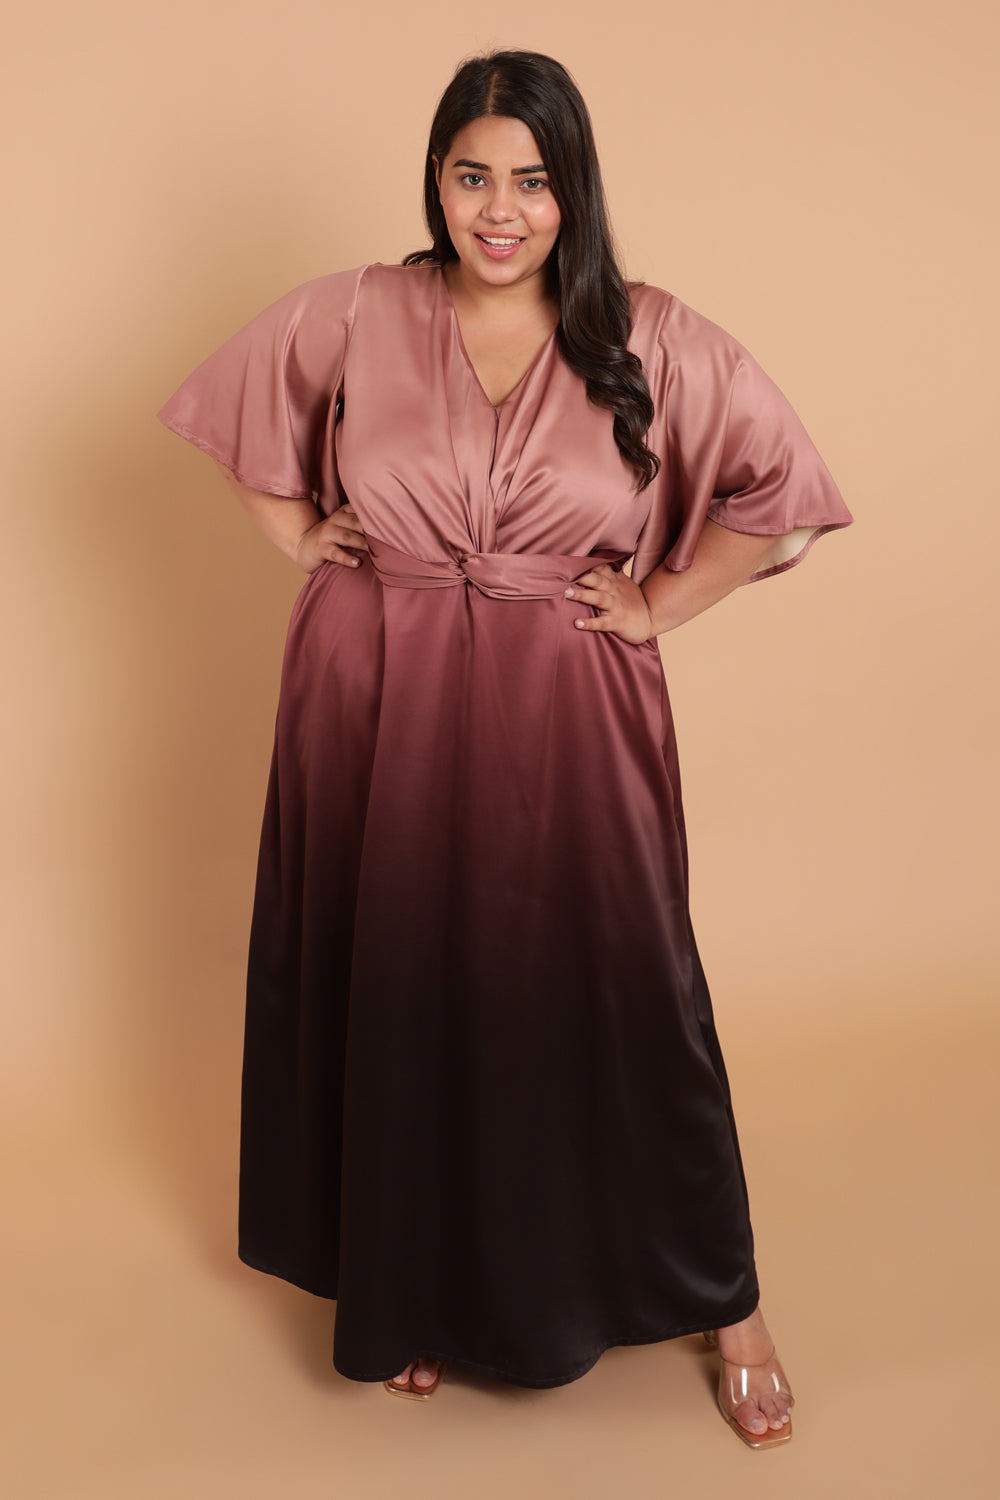 How to Wear Plus Size Cocktail Dresses to Sizzle the Night! | by Lurap  Fashion | Medium